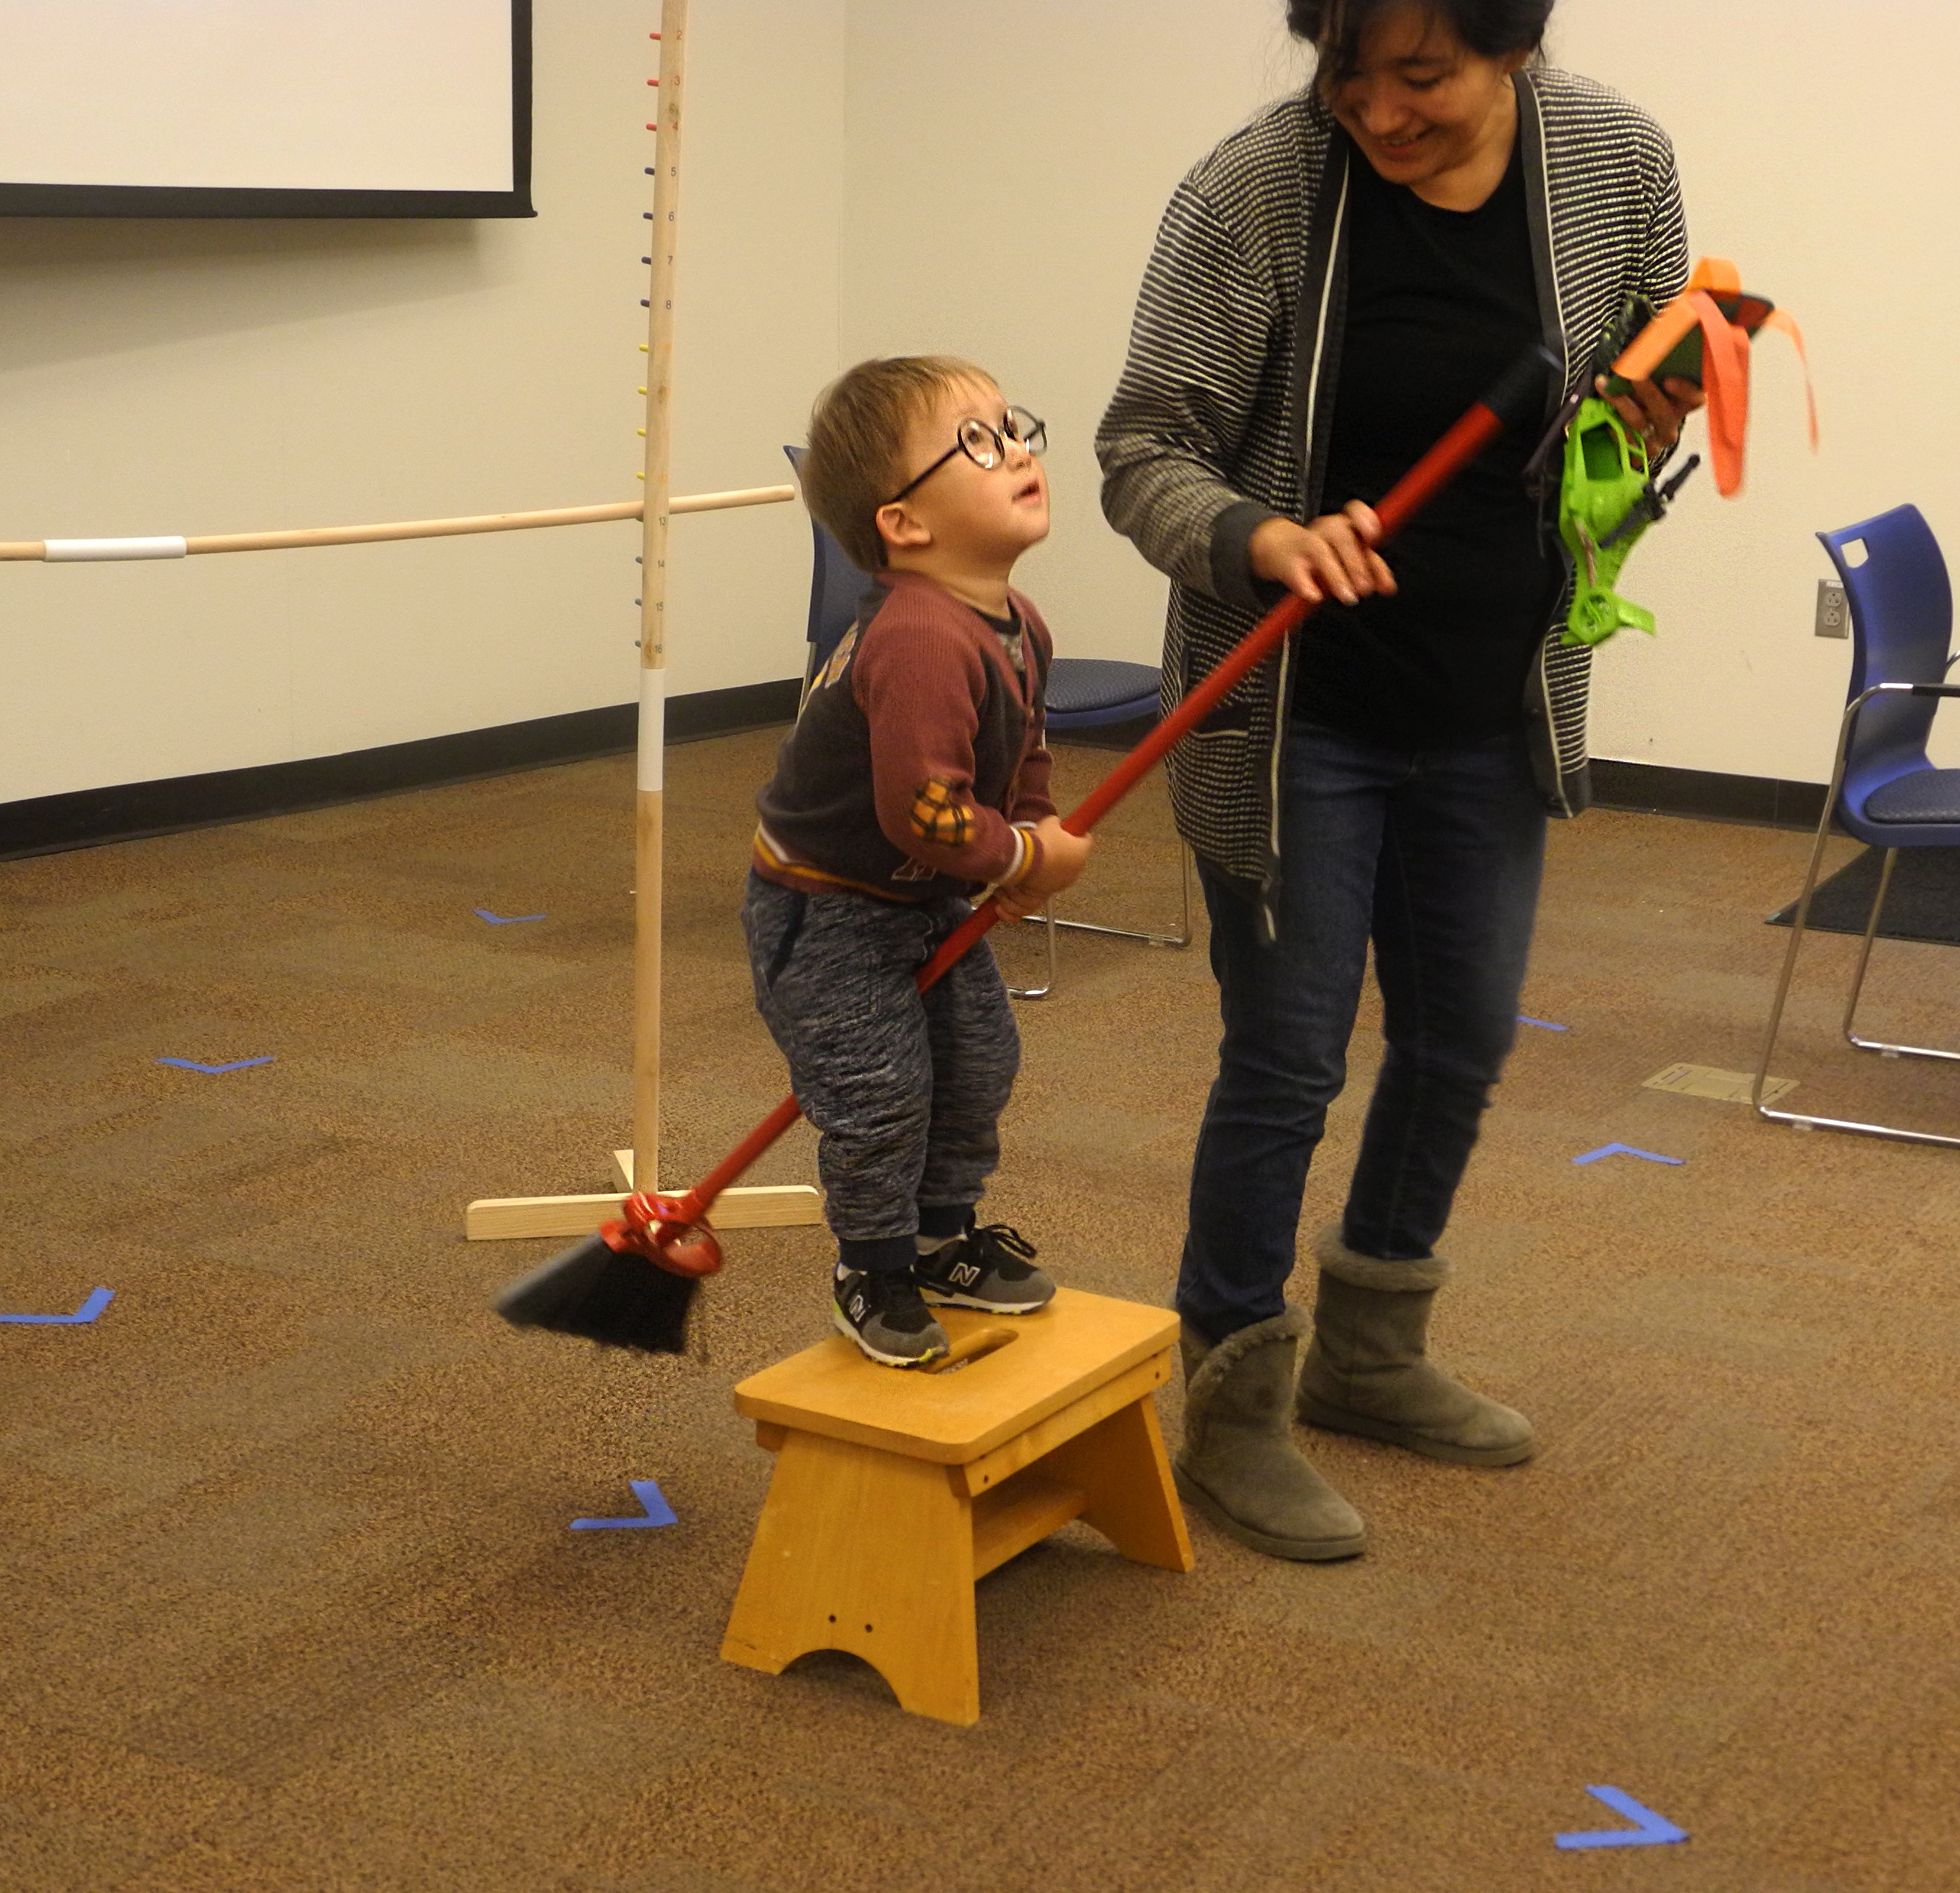 A young boy channels his inner Harry Potter before hopping off a stool on his broom at a Harry Potter Book Night event.